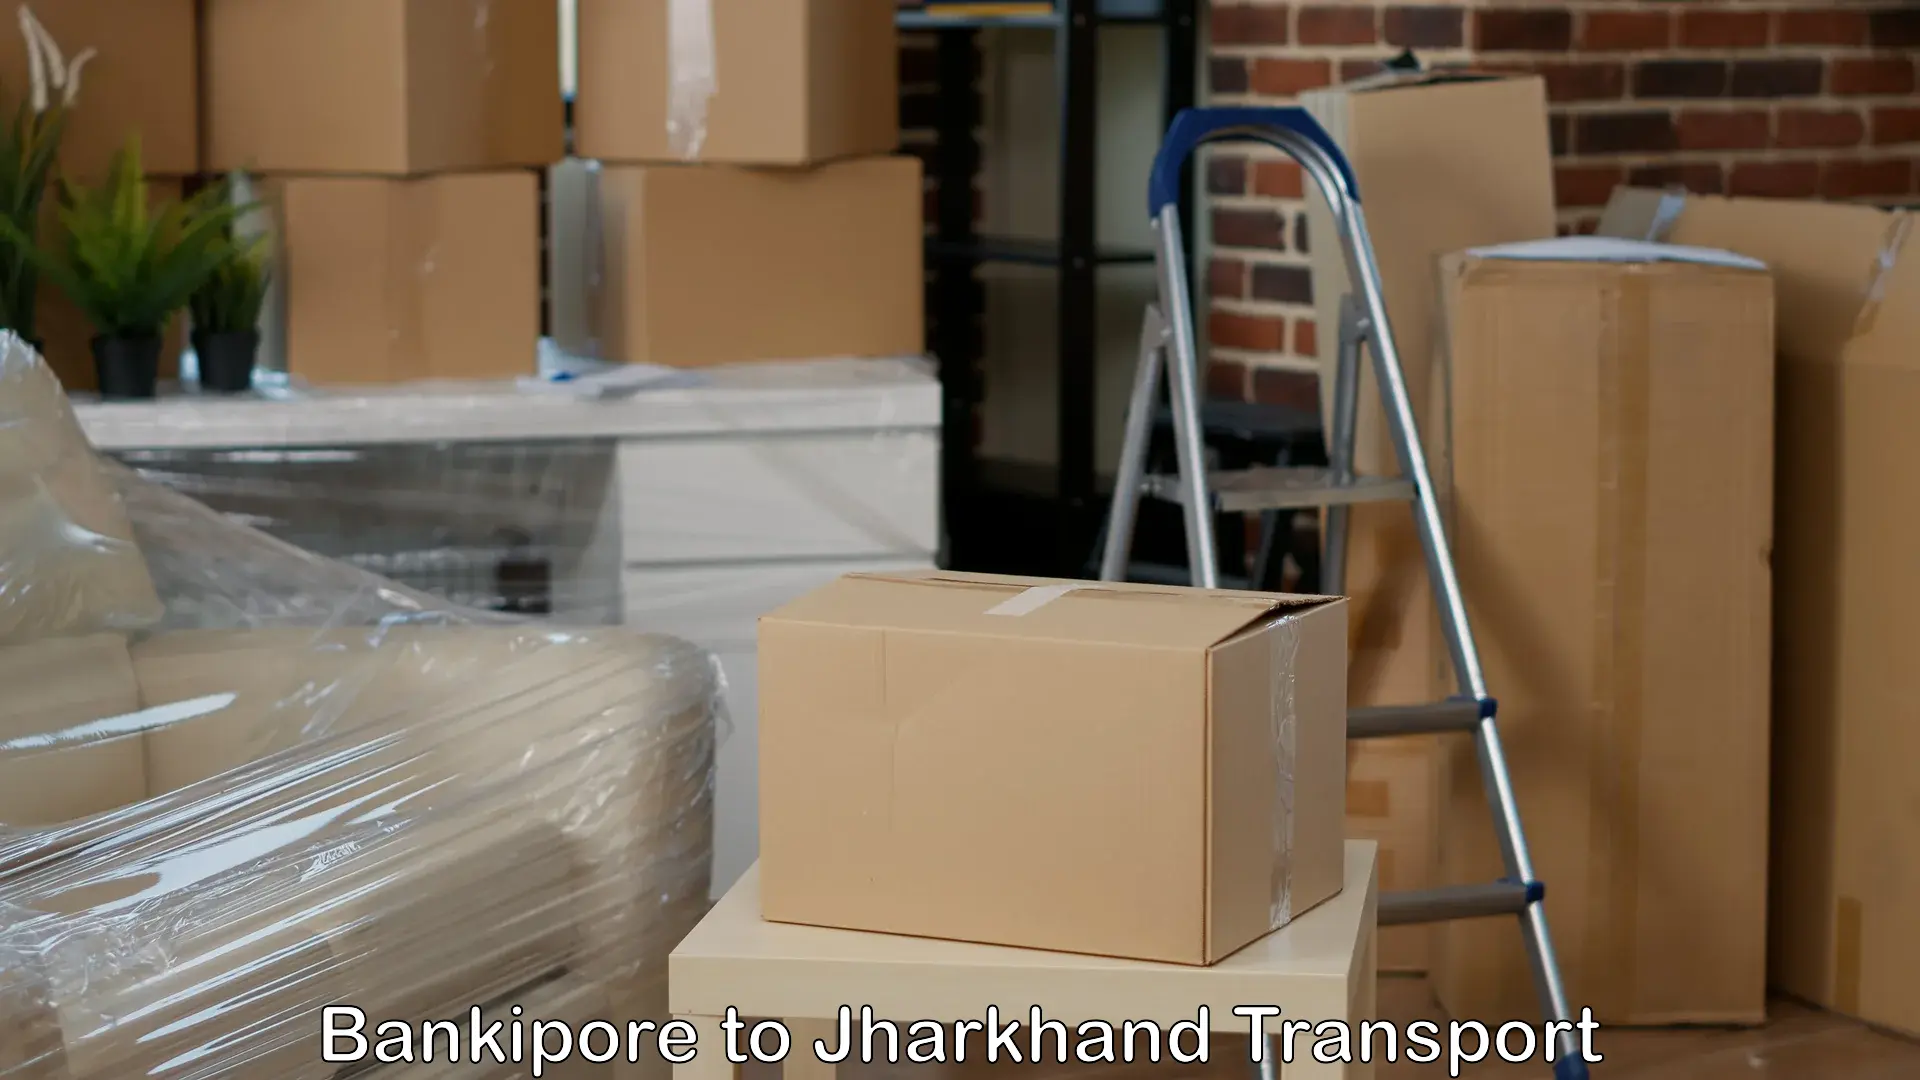 Goods delivery service Bankipore to Ranchi